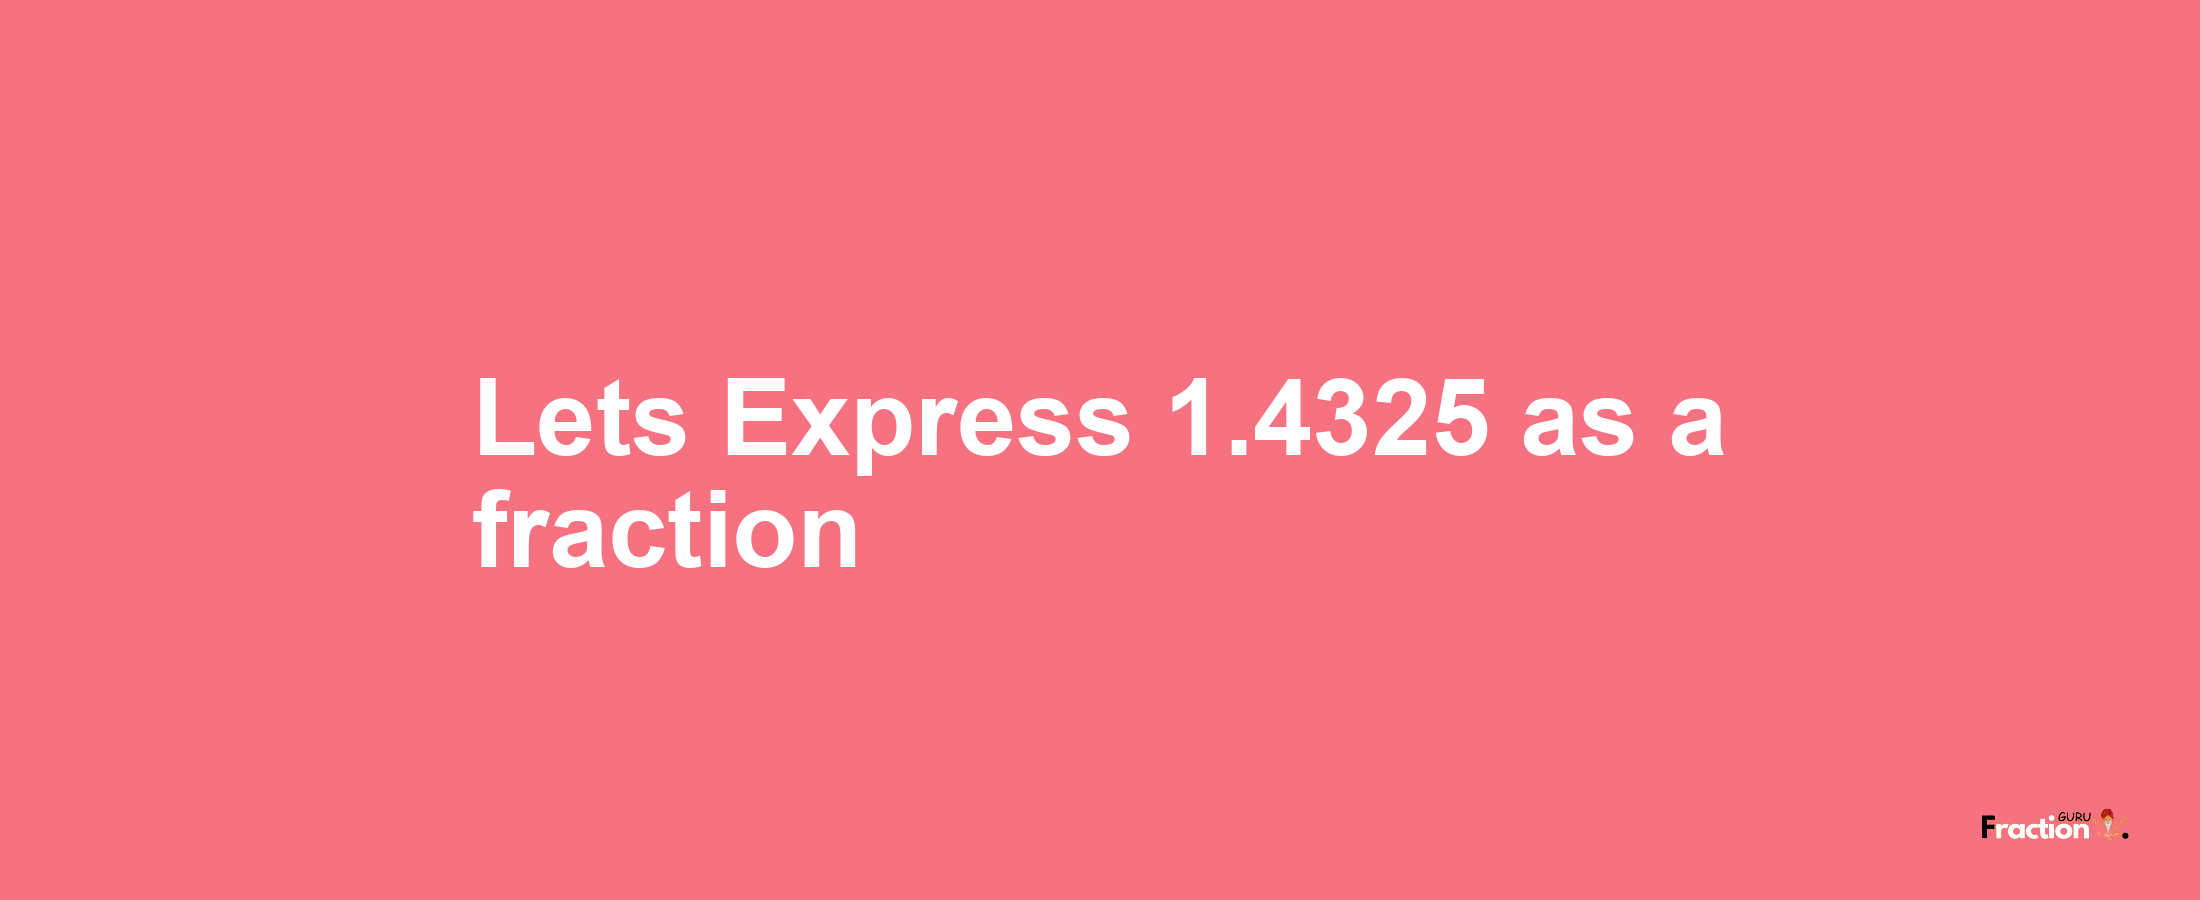 Lets Express 1.4325 as afraction